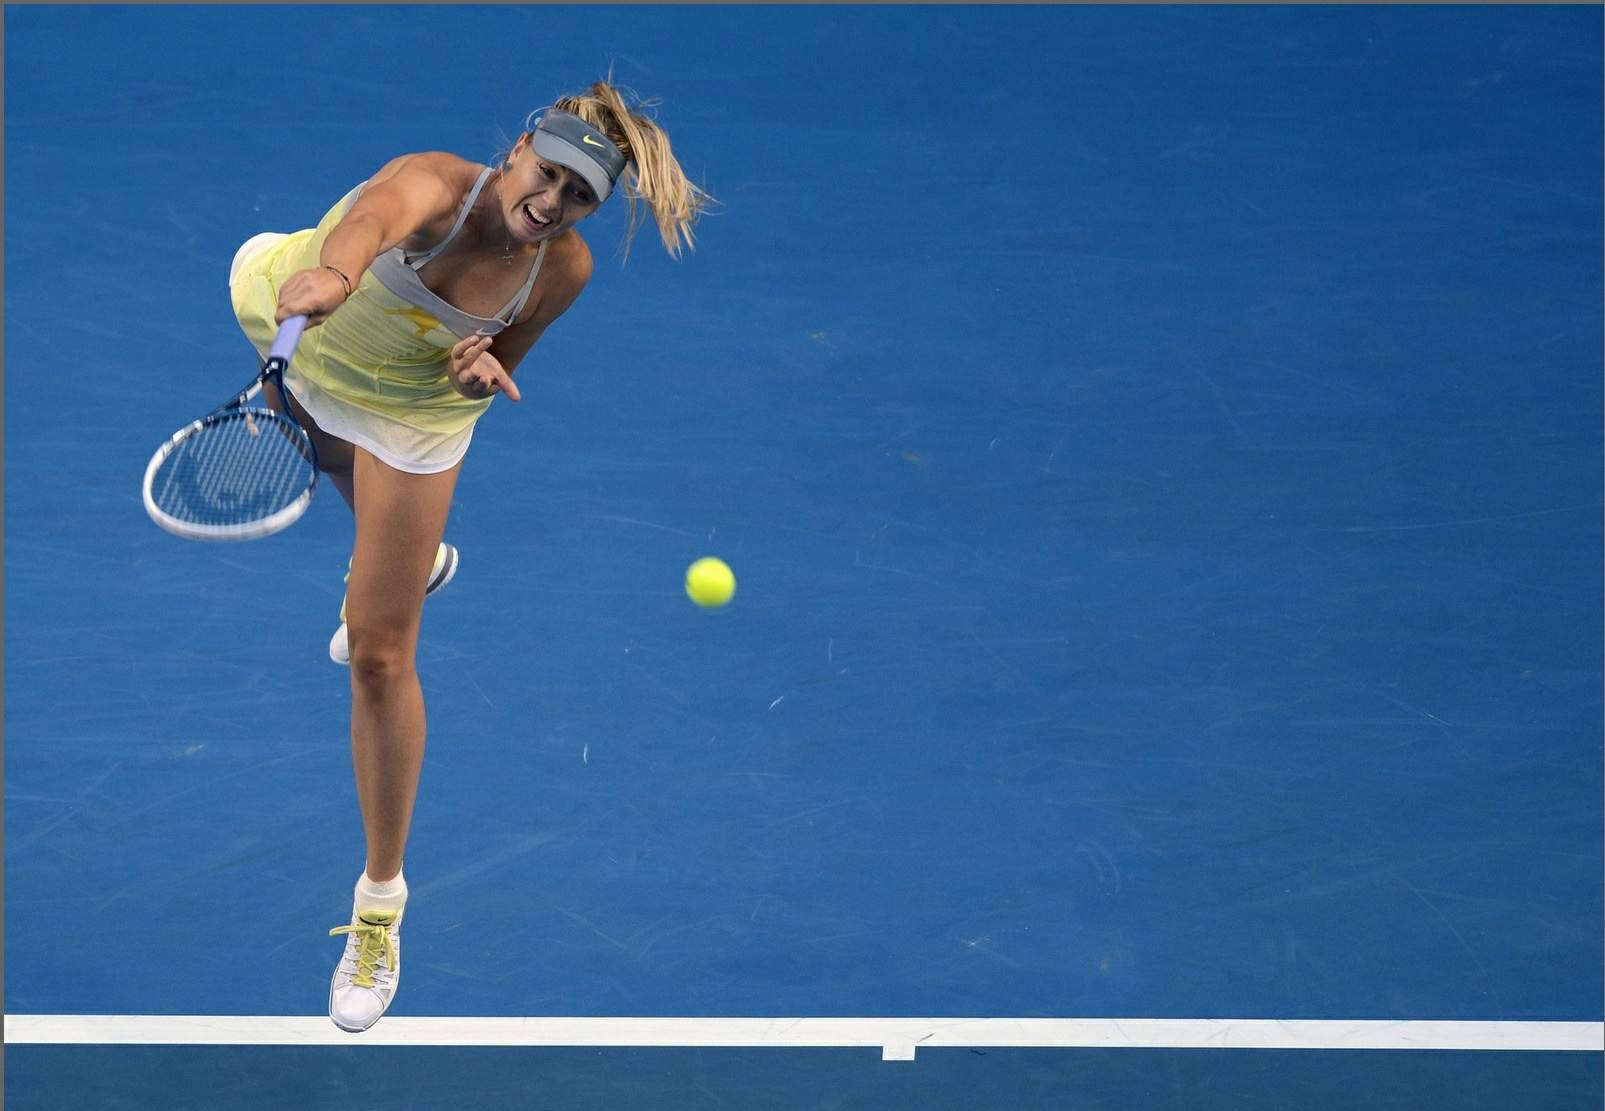 Maria Sharapova flashing her panties at the Australian Open in Melbourne #75243556